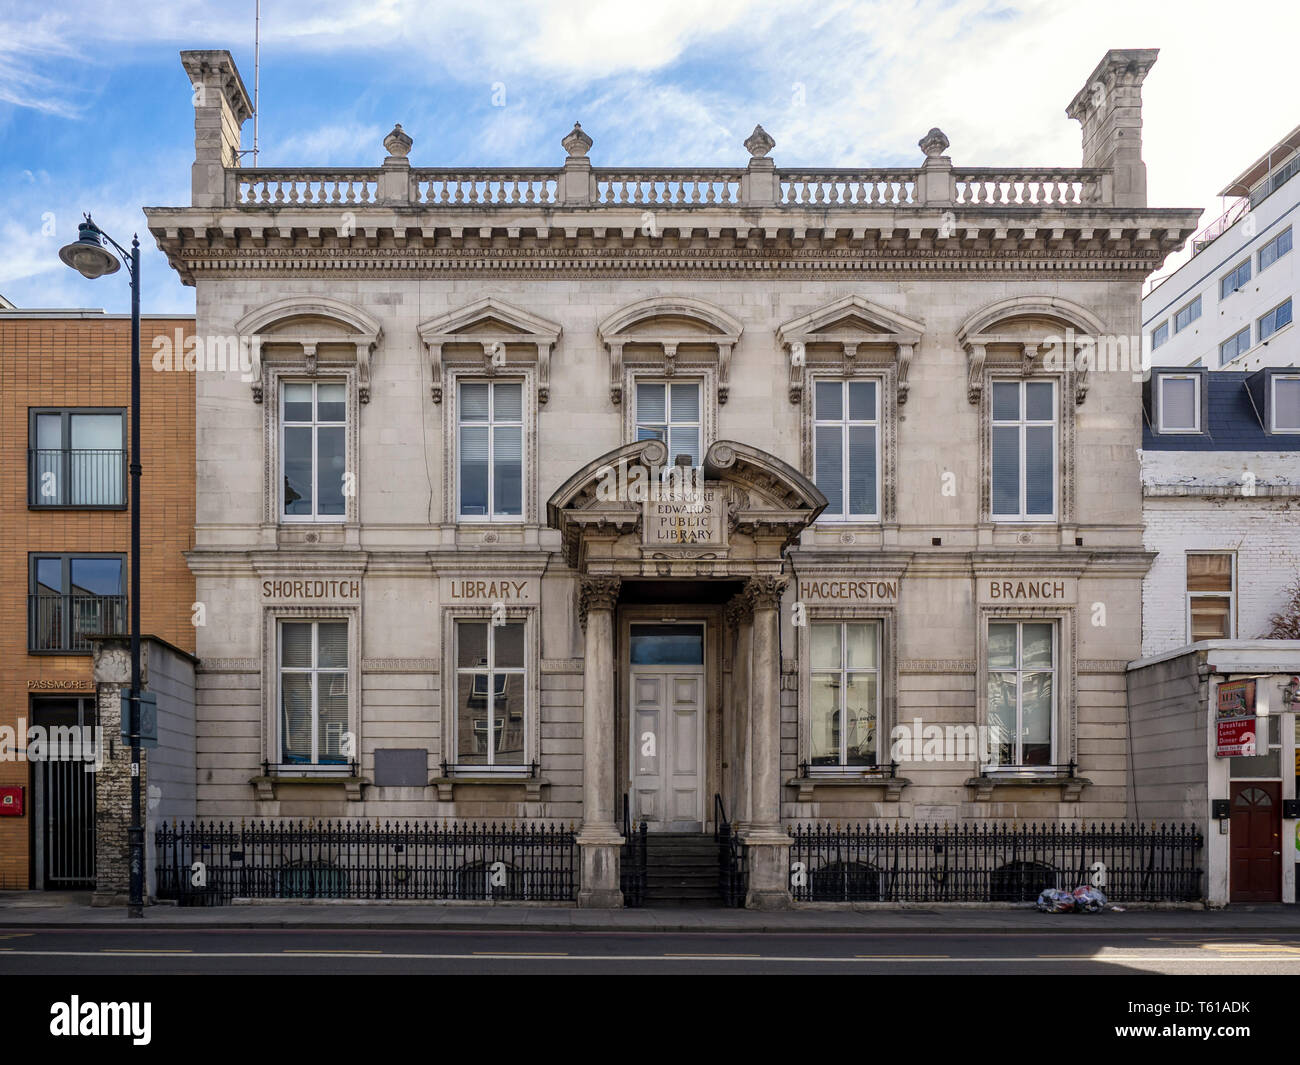 LONDON, UK - JUNE 14, 2018:  Exterior view of Shoreditch Library Haggerston Branch Building - a grade ii listed building in Hoxton Street Stock Photo